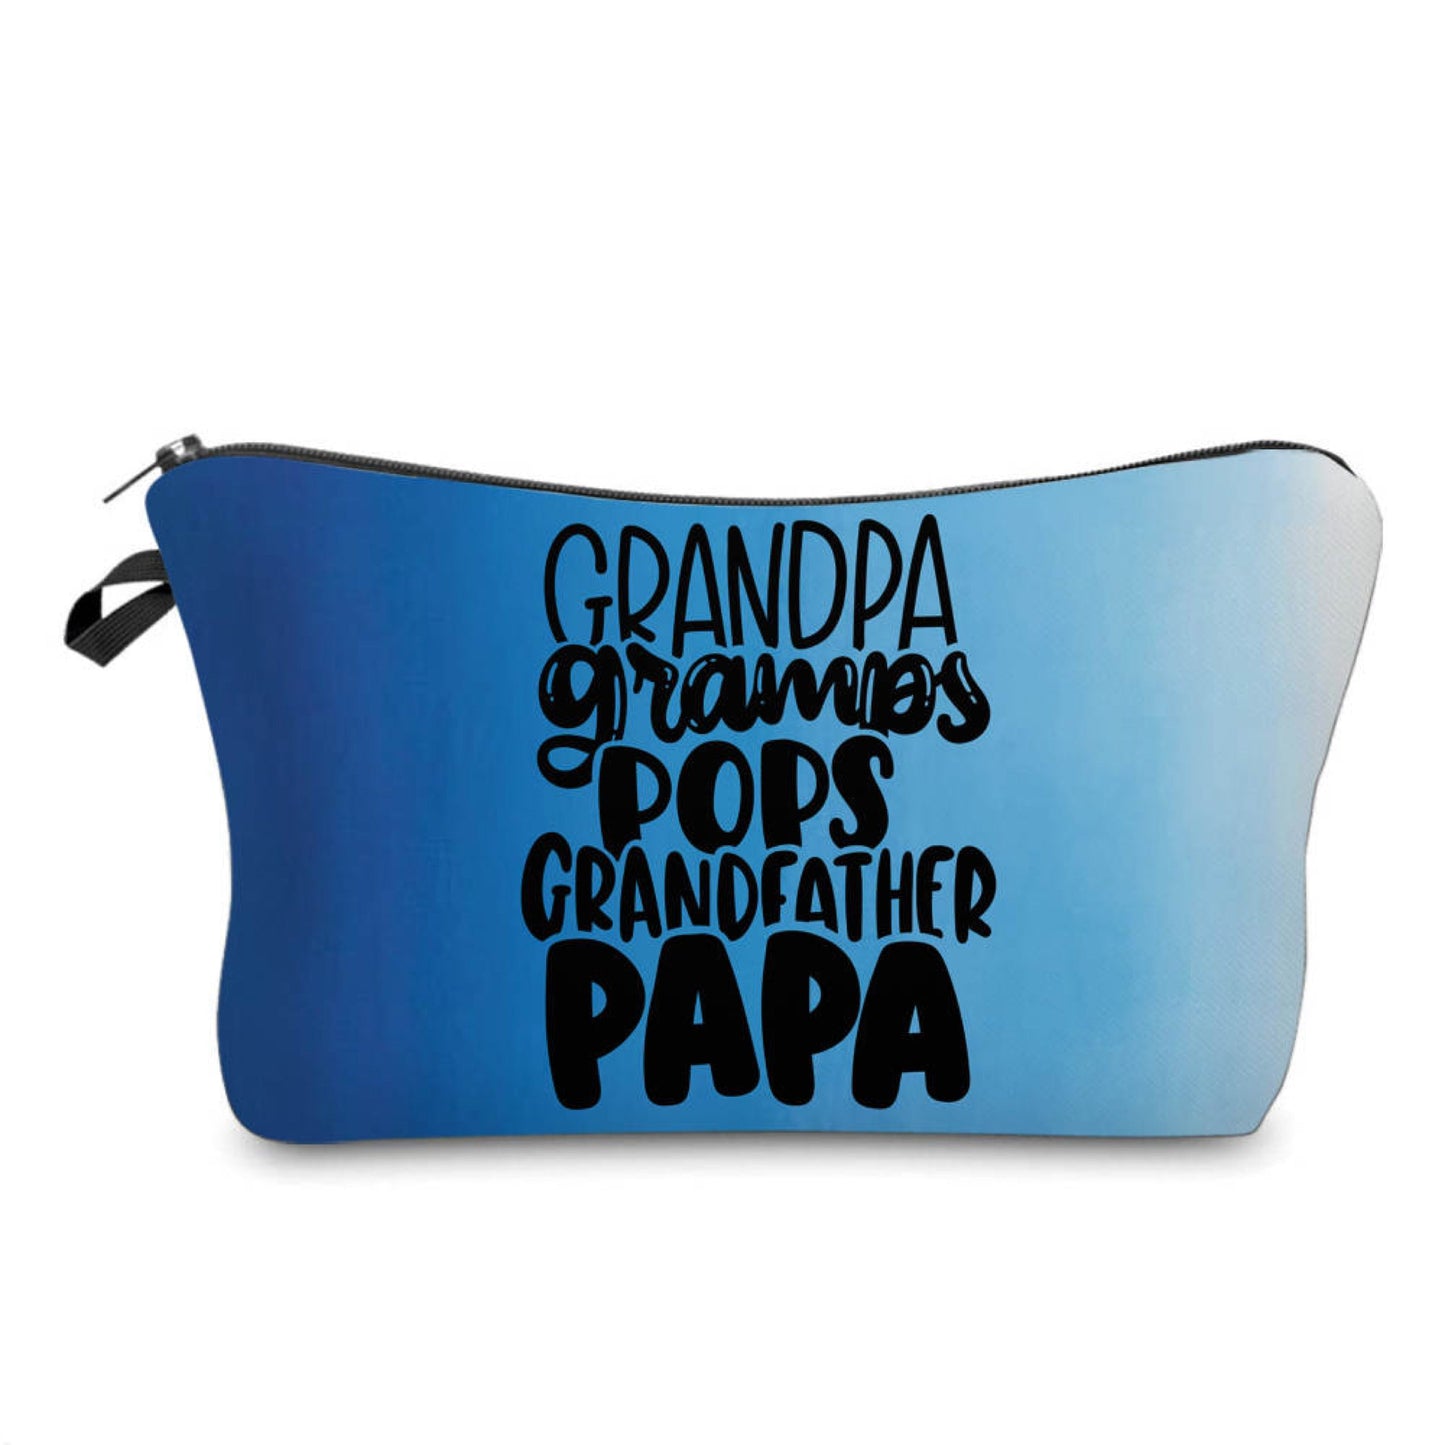 Grandpa Gramps Pops Grandfather Papa - Water-Resistant Multi-Use Pouch